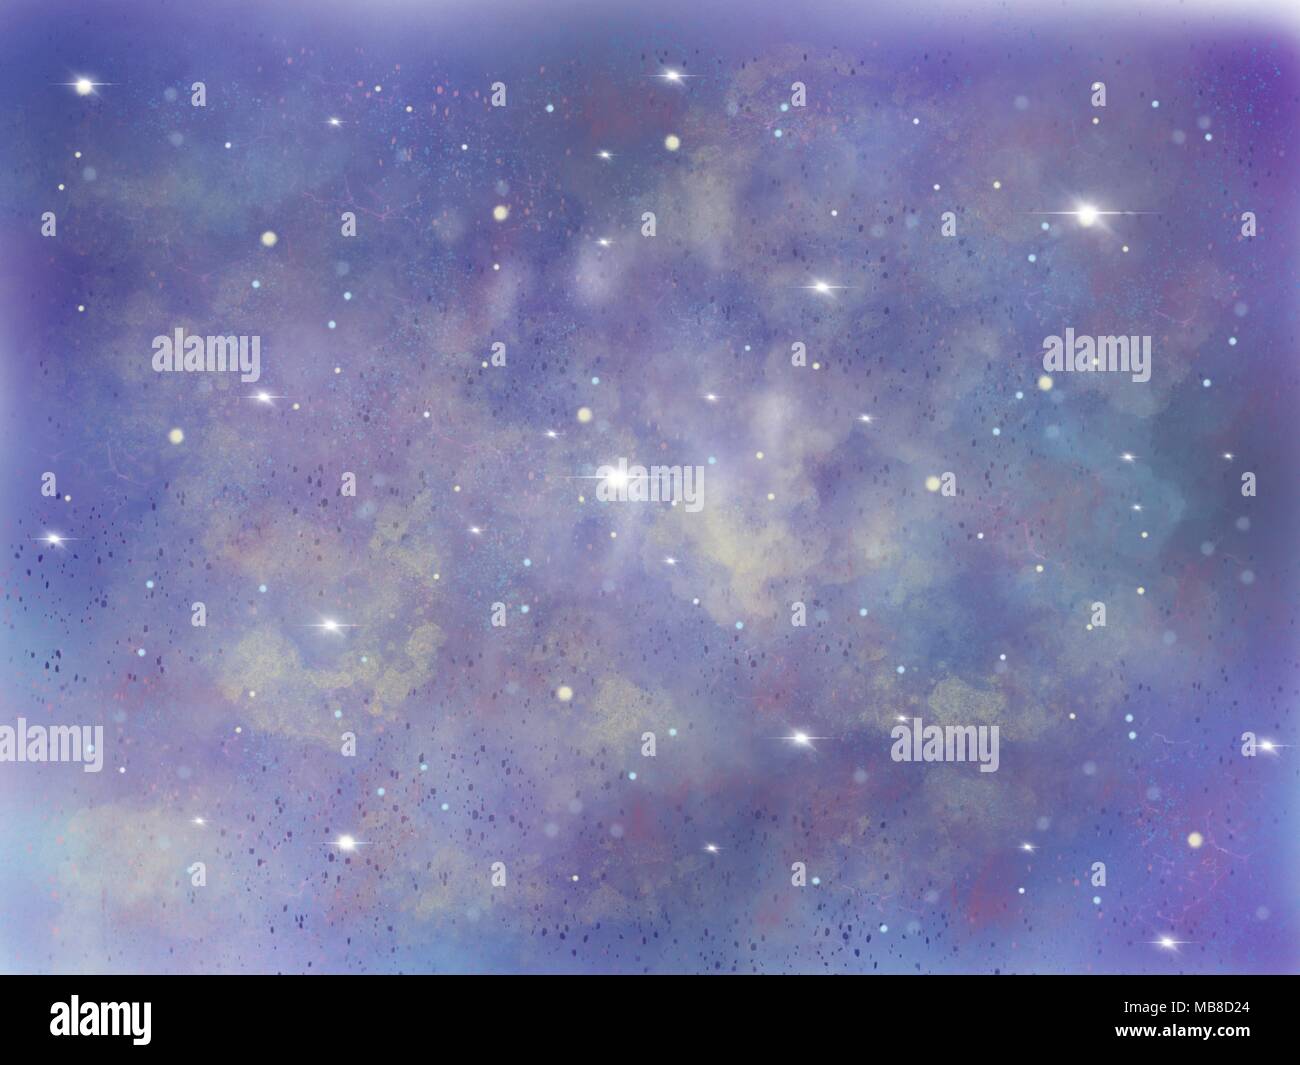 Blue And Purple Space Illustration Background With A Shining